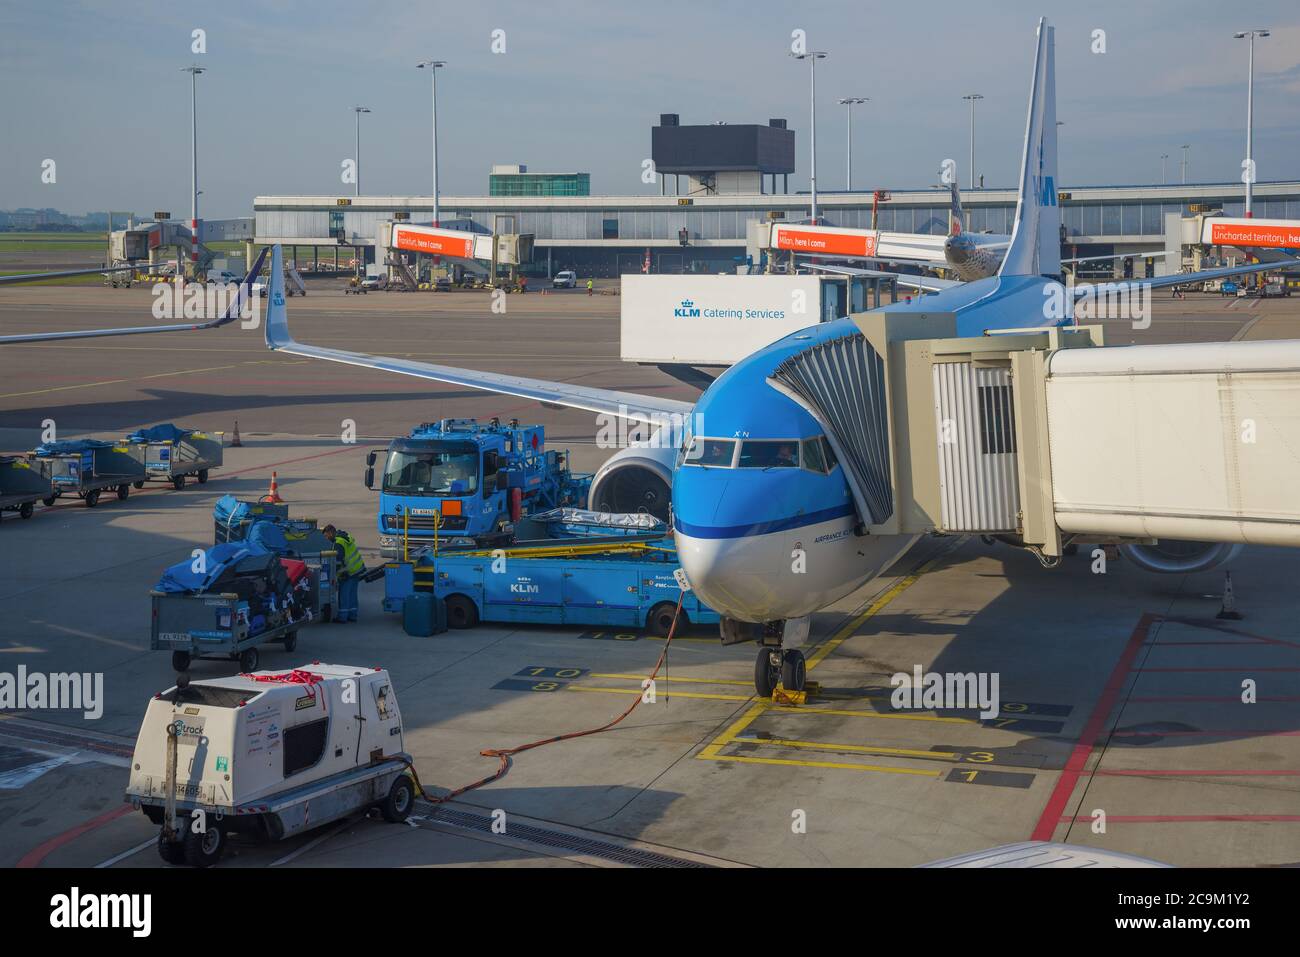 AMSTERDAM, NETHERLANDS - SEPTEMBER 17, 2017: Boeing 737 plane of Air France-KLM prepares for departure in Schiphol airport on a sunny day Stock Photo